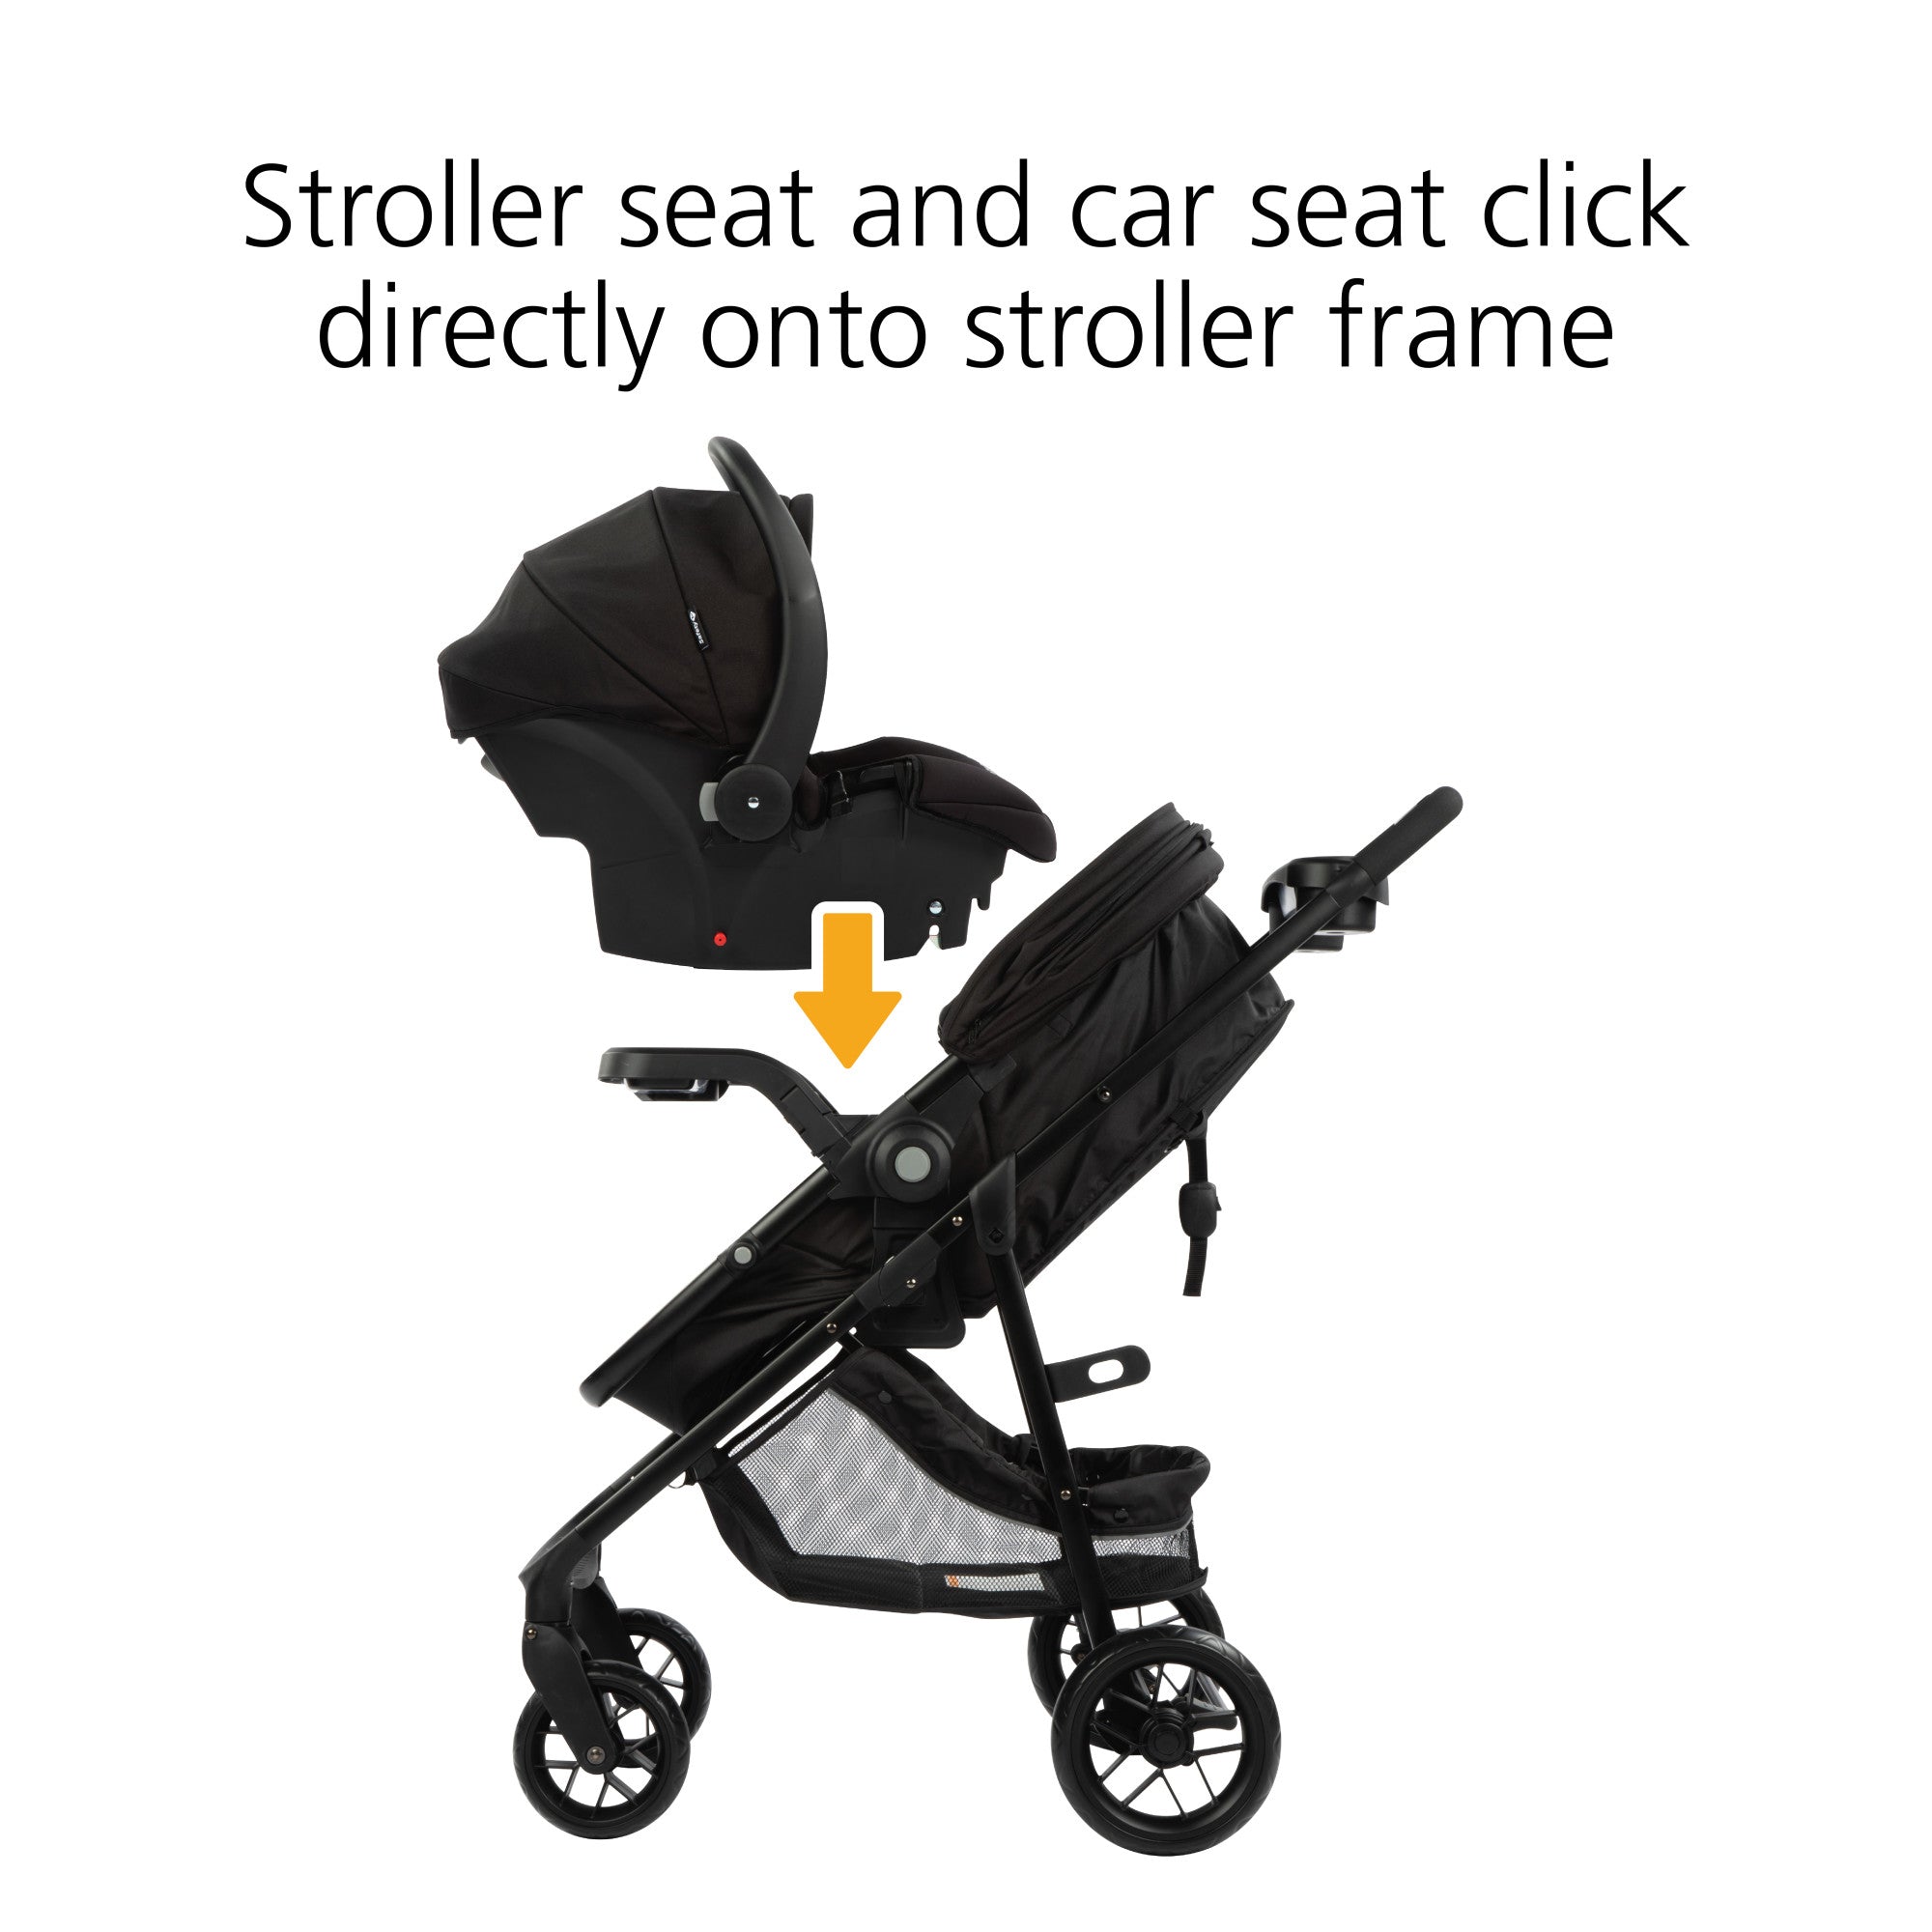 Grow and Go™ Flex 8-in-1 Travel System - stroller seat and car seat click directly onto stroller frame